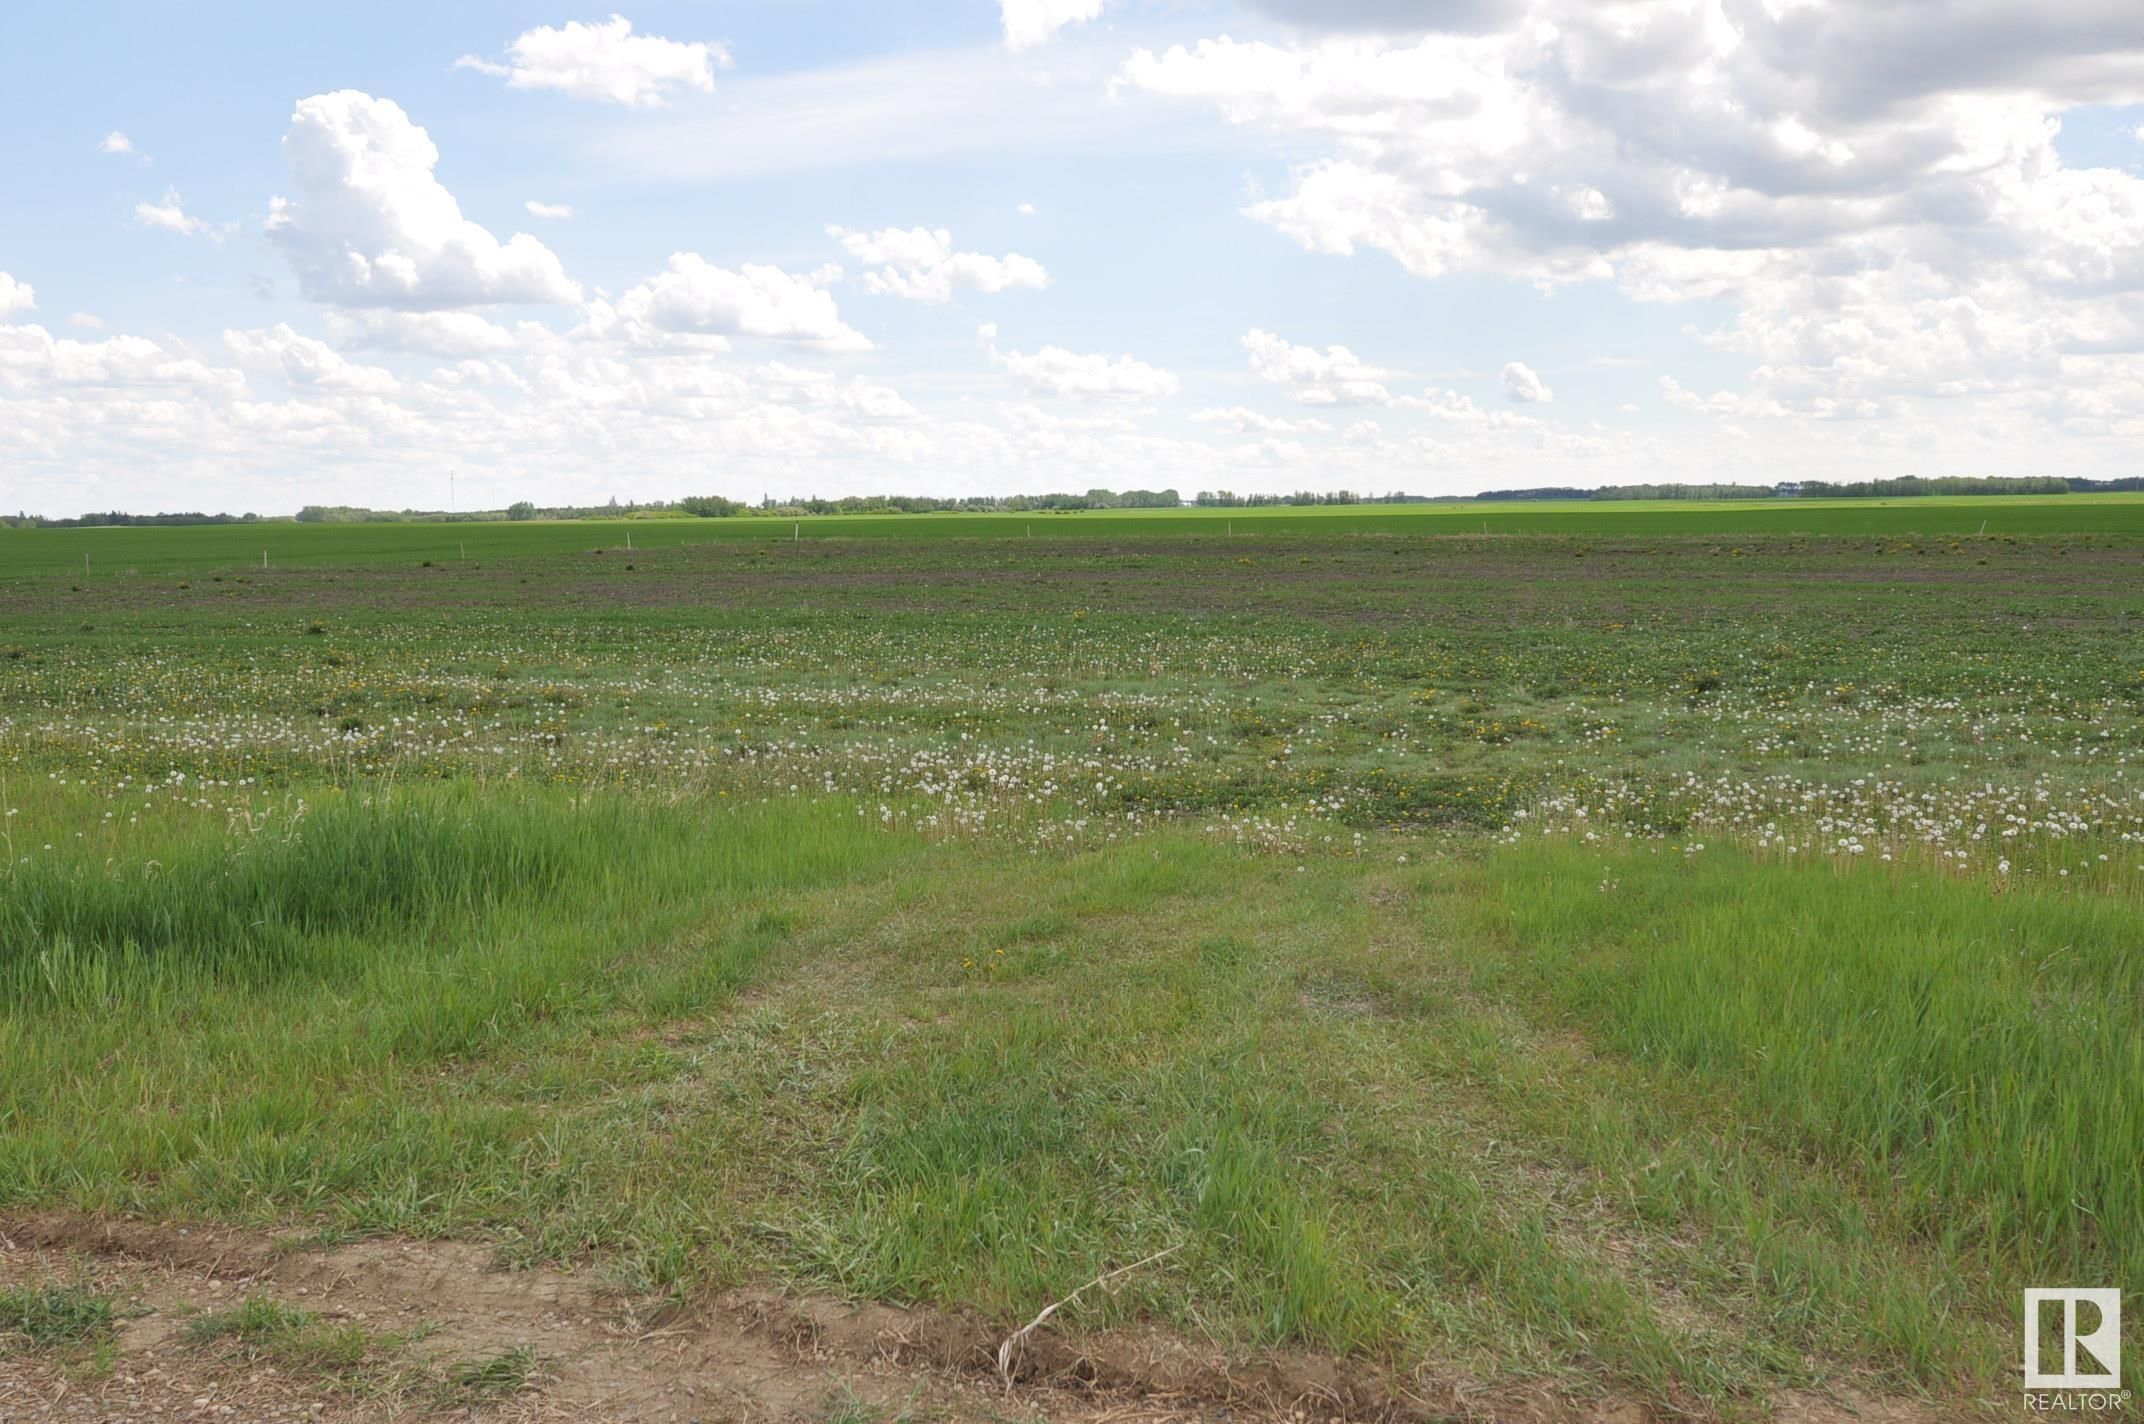 Main Photo: RR 260 & Twp 564 NW: Rural Sturgeon County Rural Land/Vacant Lot for sale : MLS®# E4298717